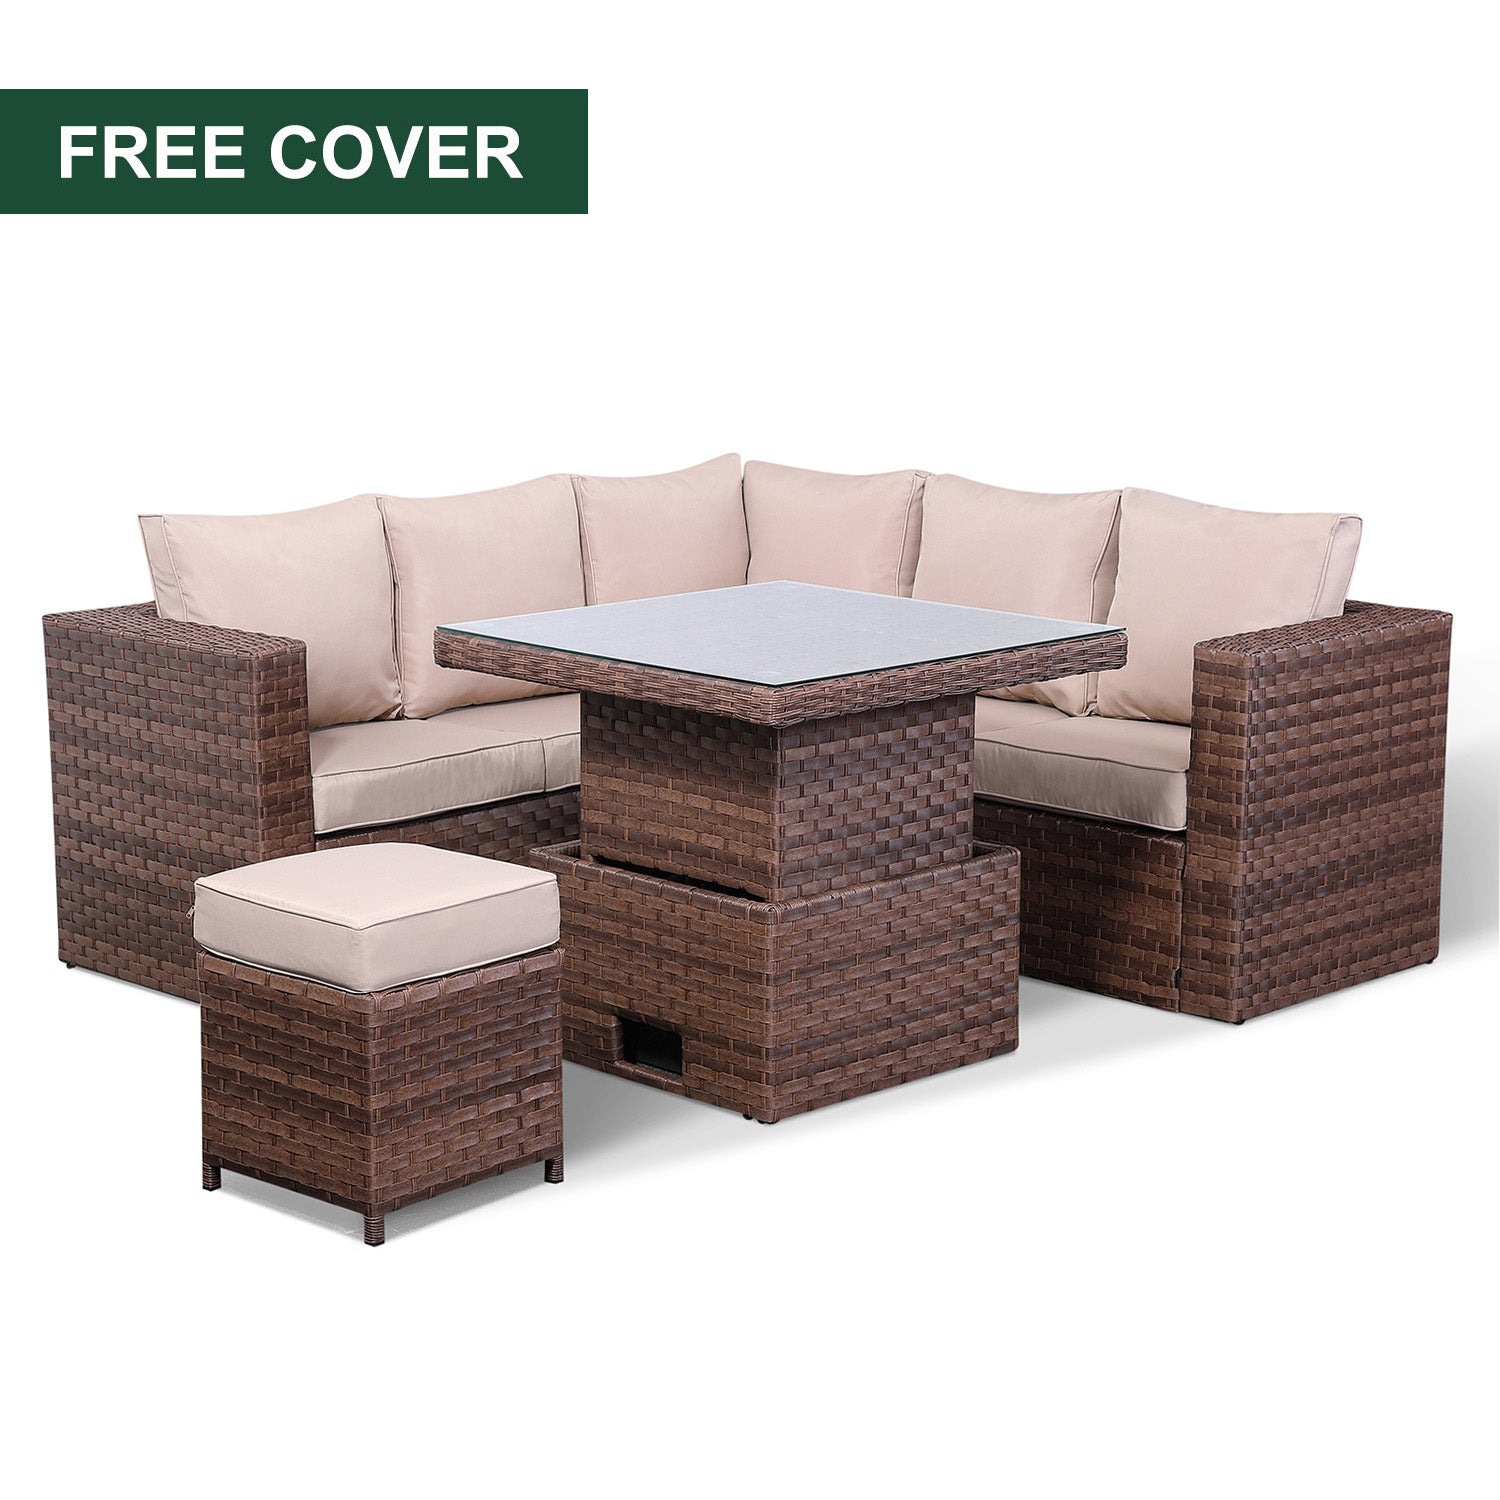 B2..Pansy Range small Dining corner sofa Set with Rising Table in wide Brown Weave